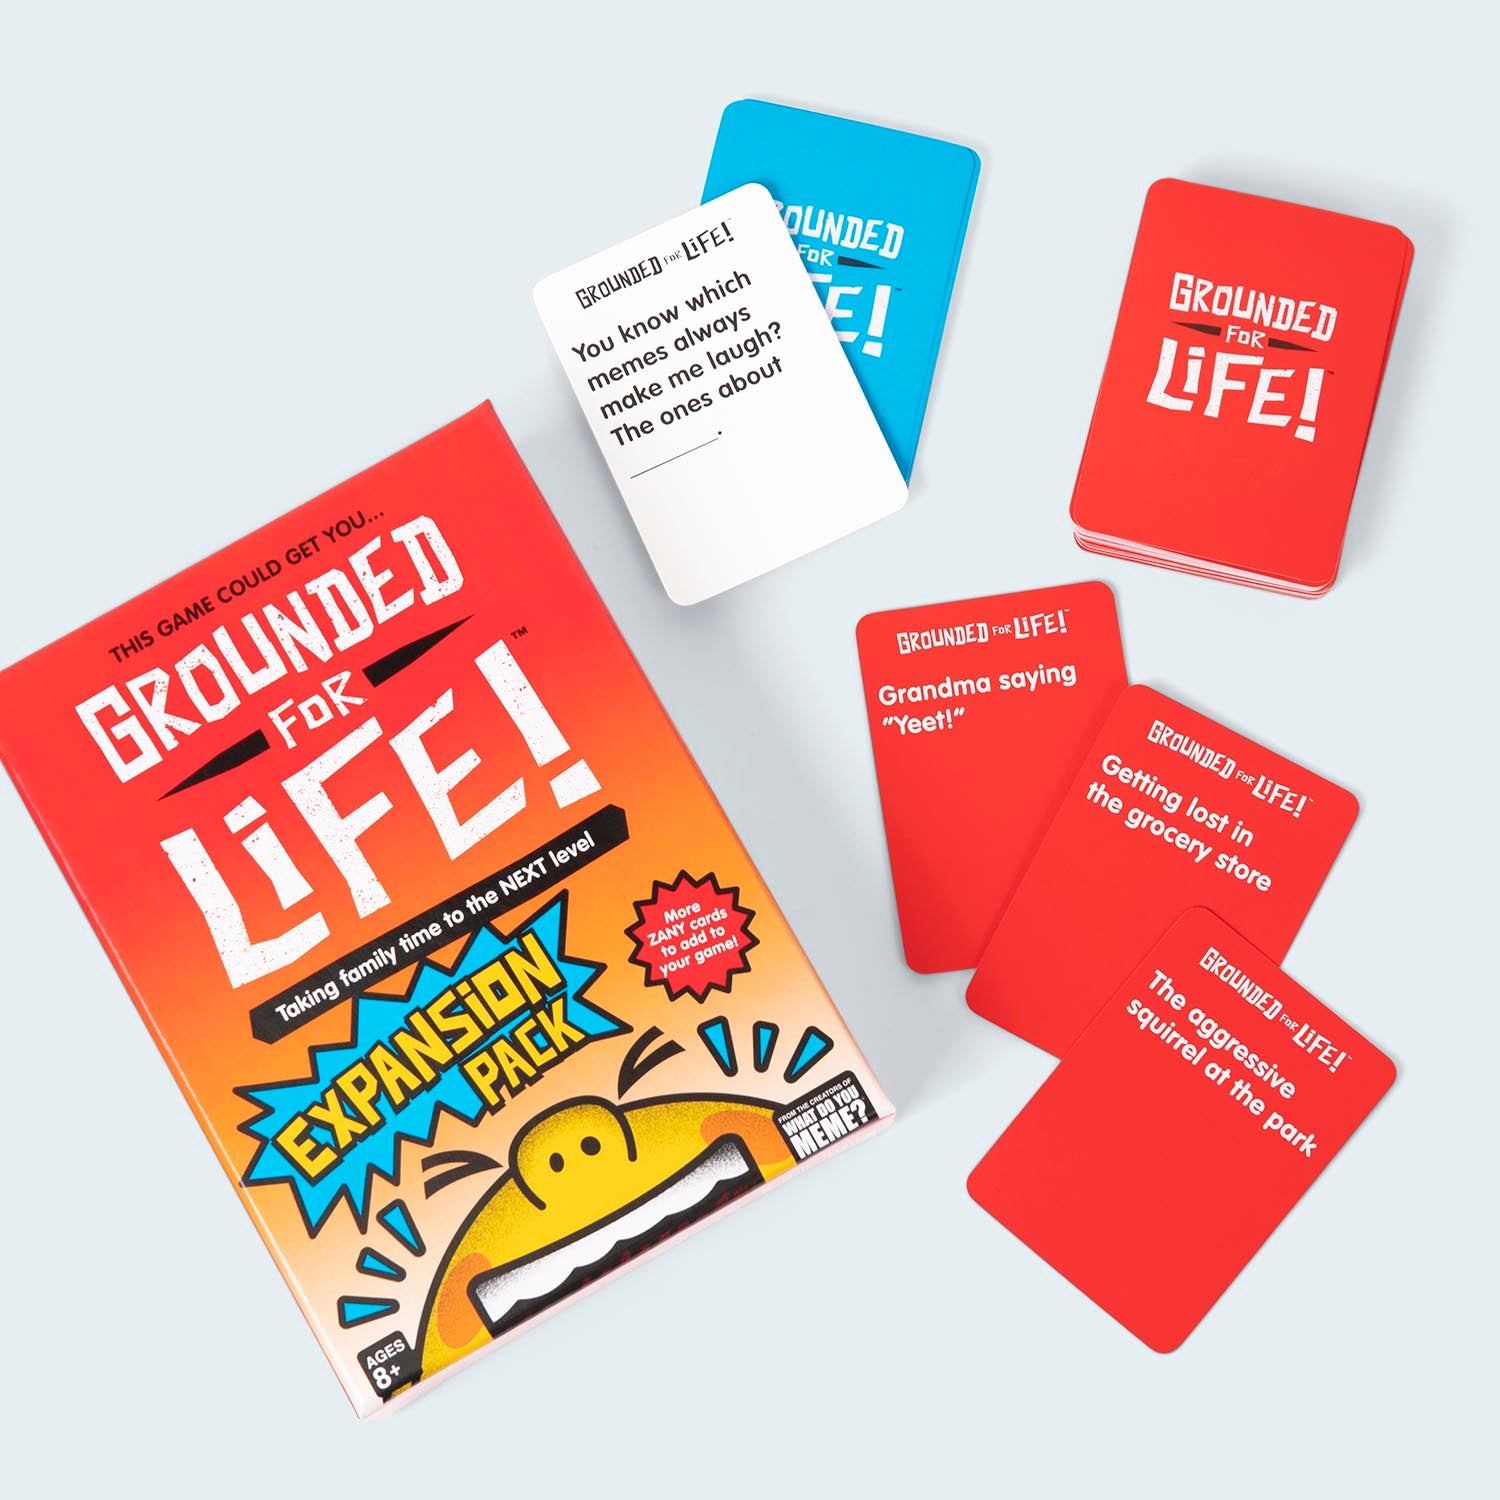 grounded-for-life-expansion-pack-game-box-and-game-play-07-what-do-you-meme-by-relatable